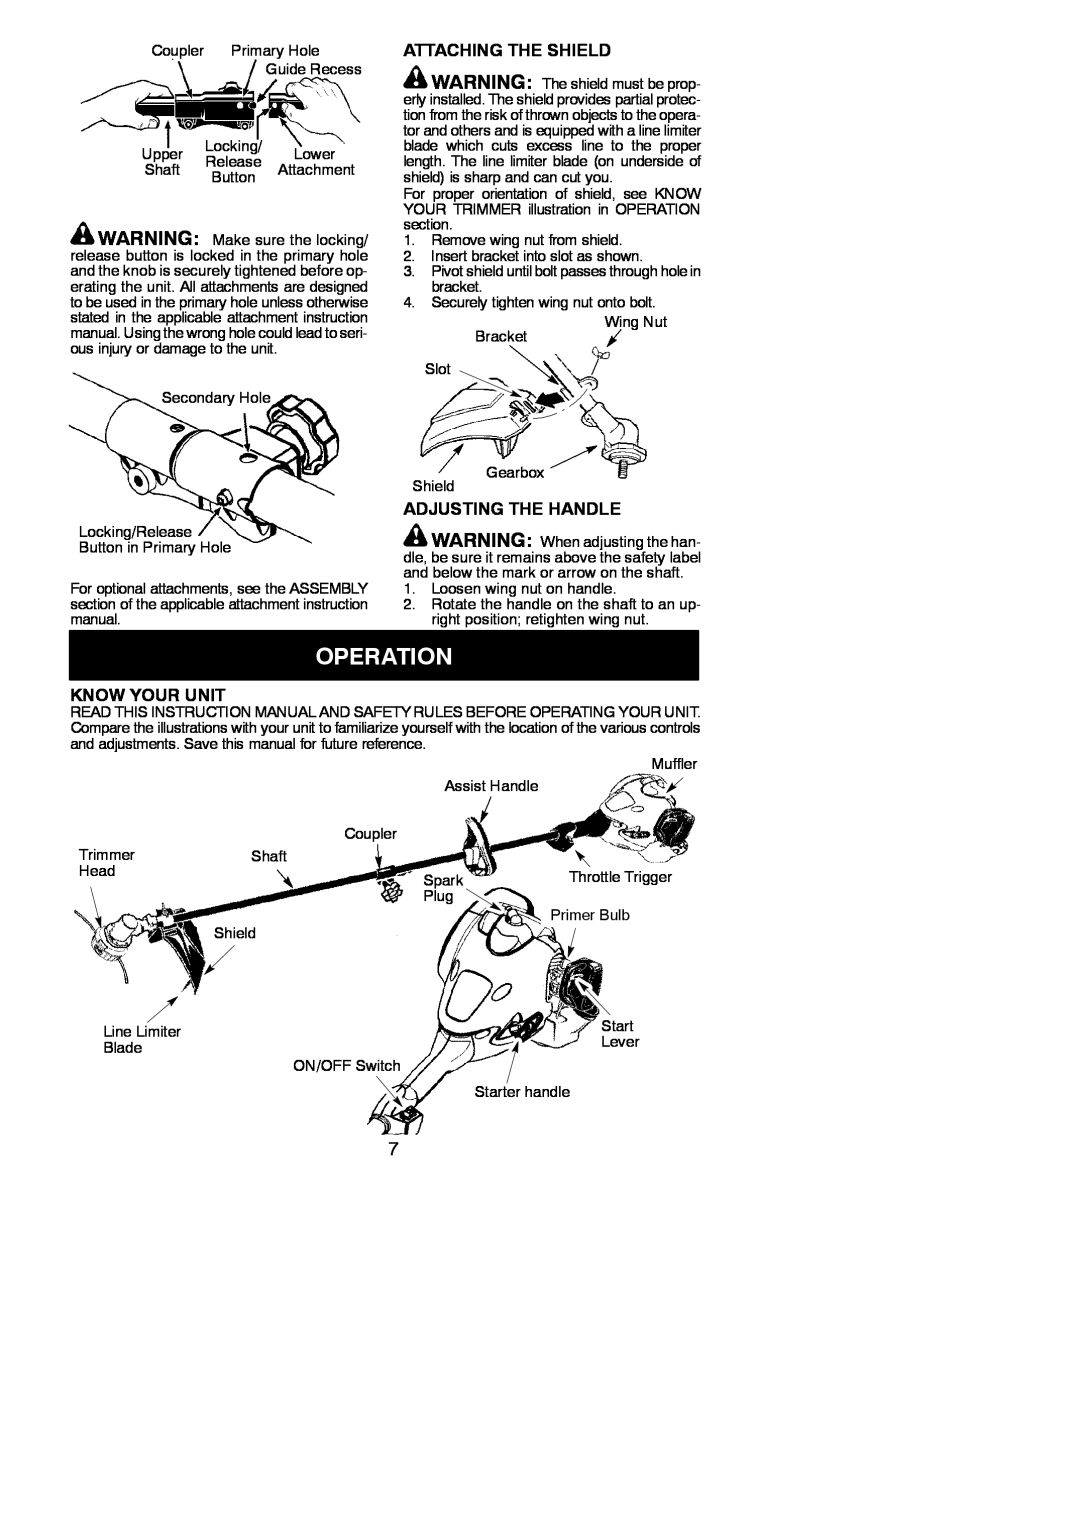 Poulan 545137277 instruction manual Operation, Attaching The Shield, Adjusting The Handle, Know Your Unit 